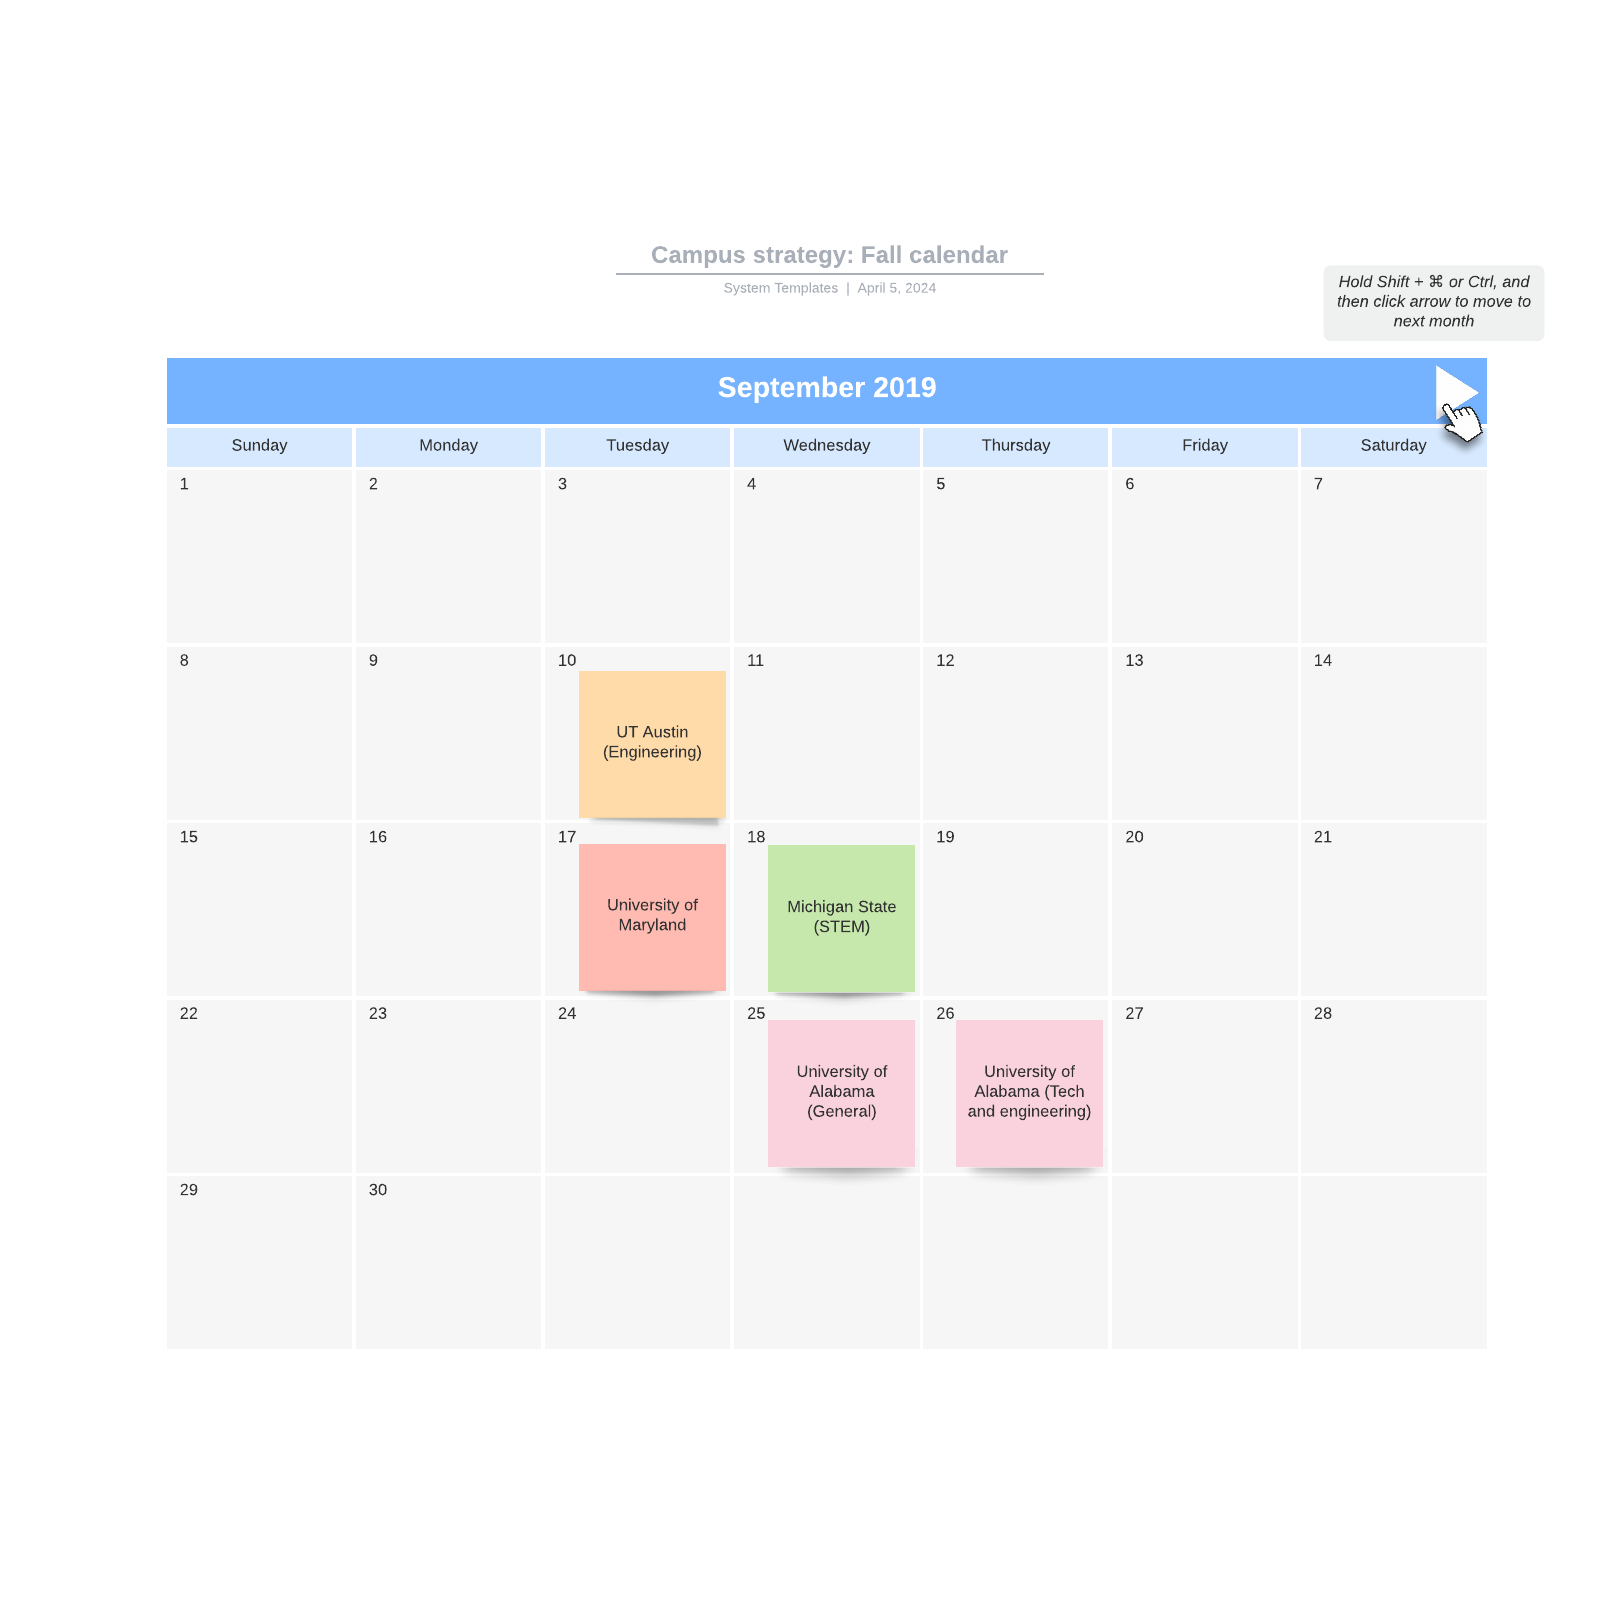 Campus strategy: Fall calendar example